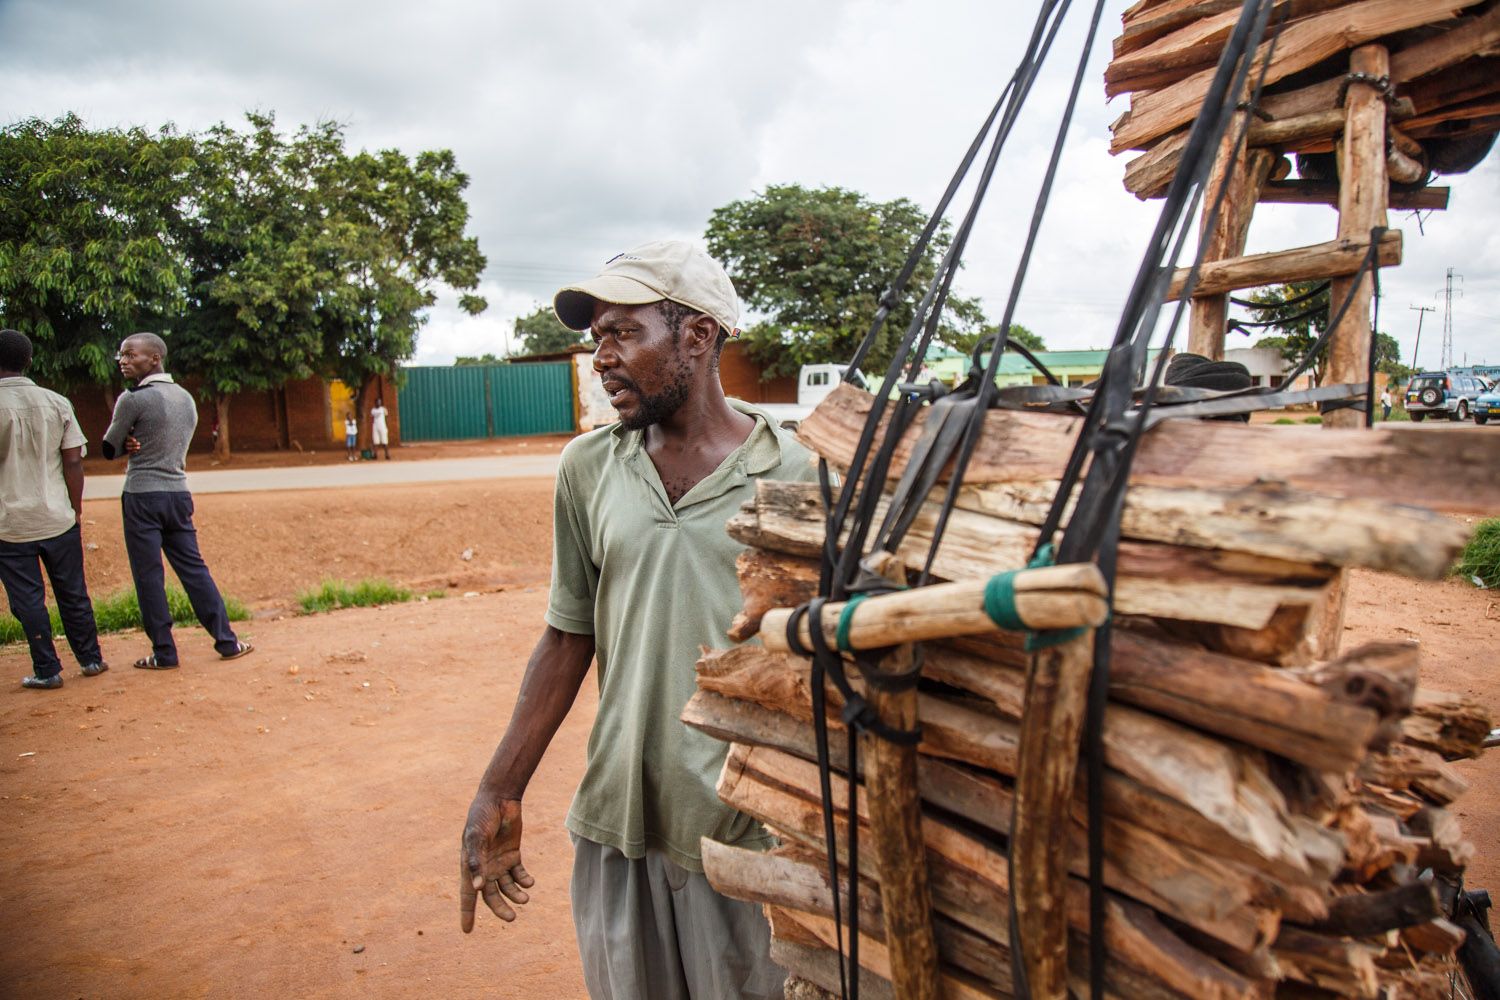 Road-side sale of firewood. Malawi loses nearly 520 square kilometres of its forests annually due to illegal logging. Image by Nathalie Bertrams. Malawi, 2017.